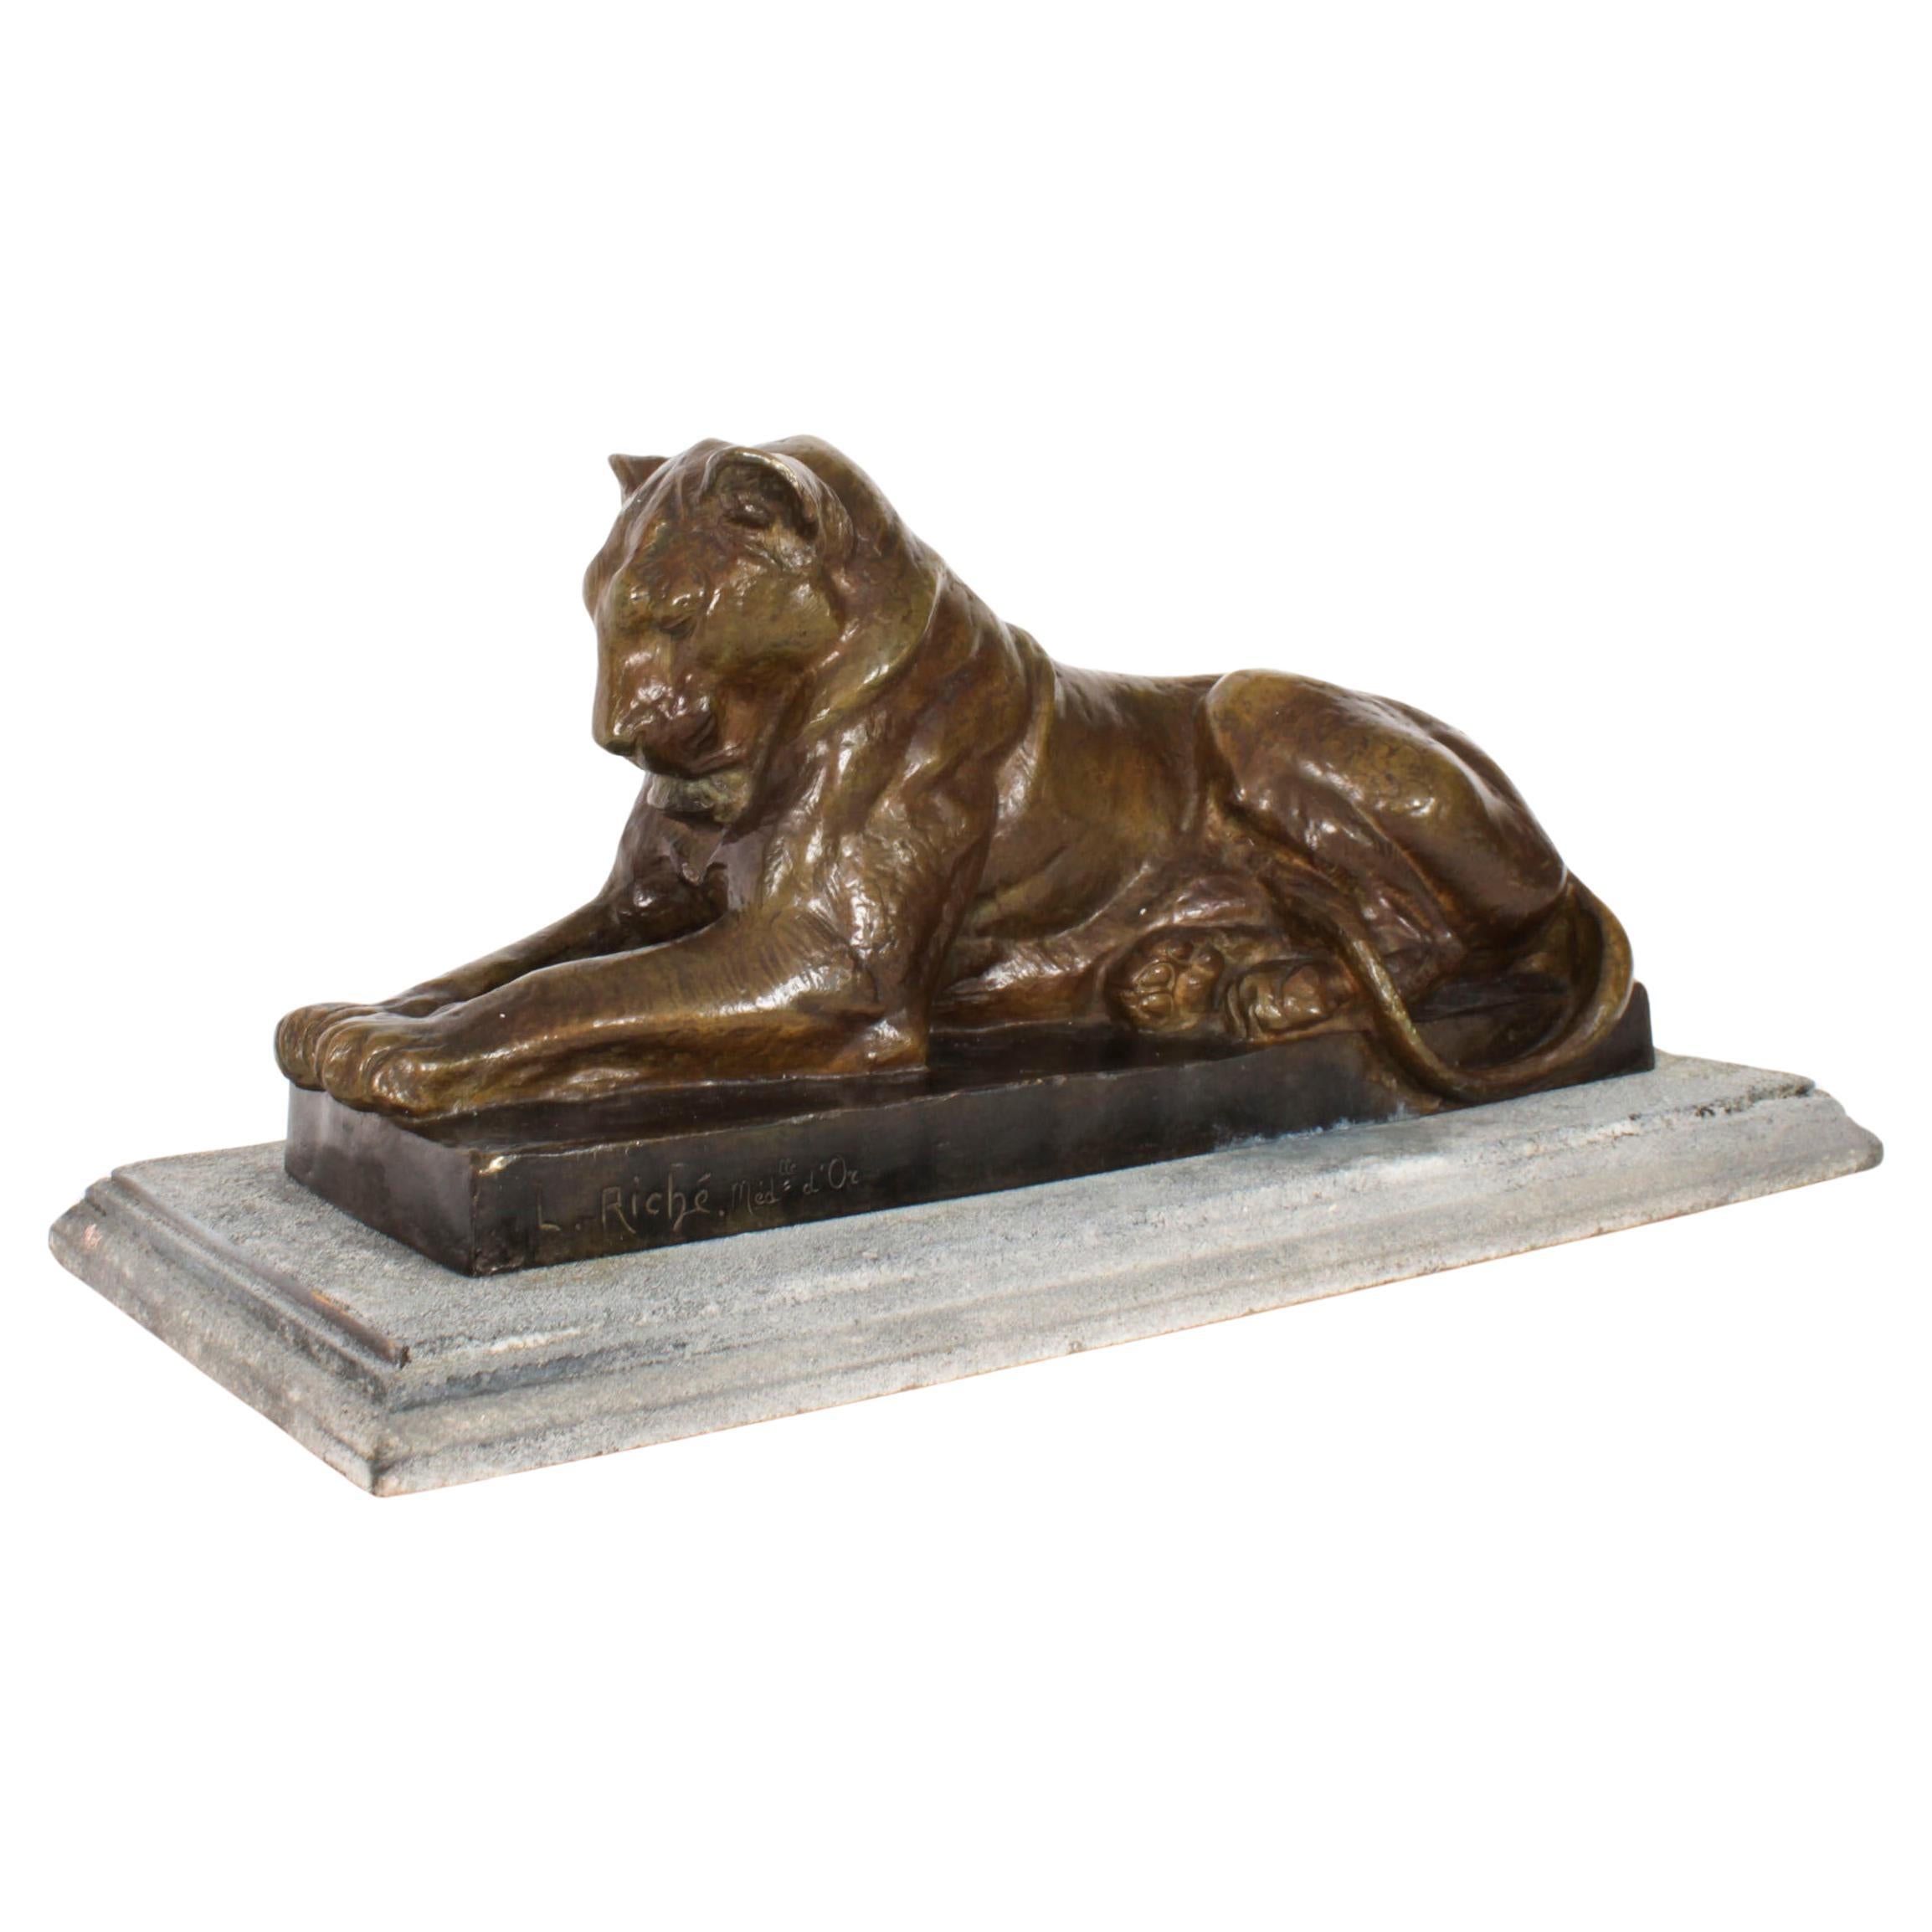 Antique French Bronze Sculpture of Lioness by Louis Riche Early 20th Century